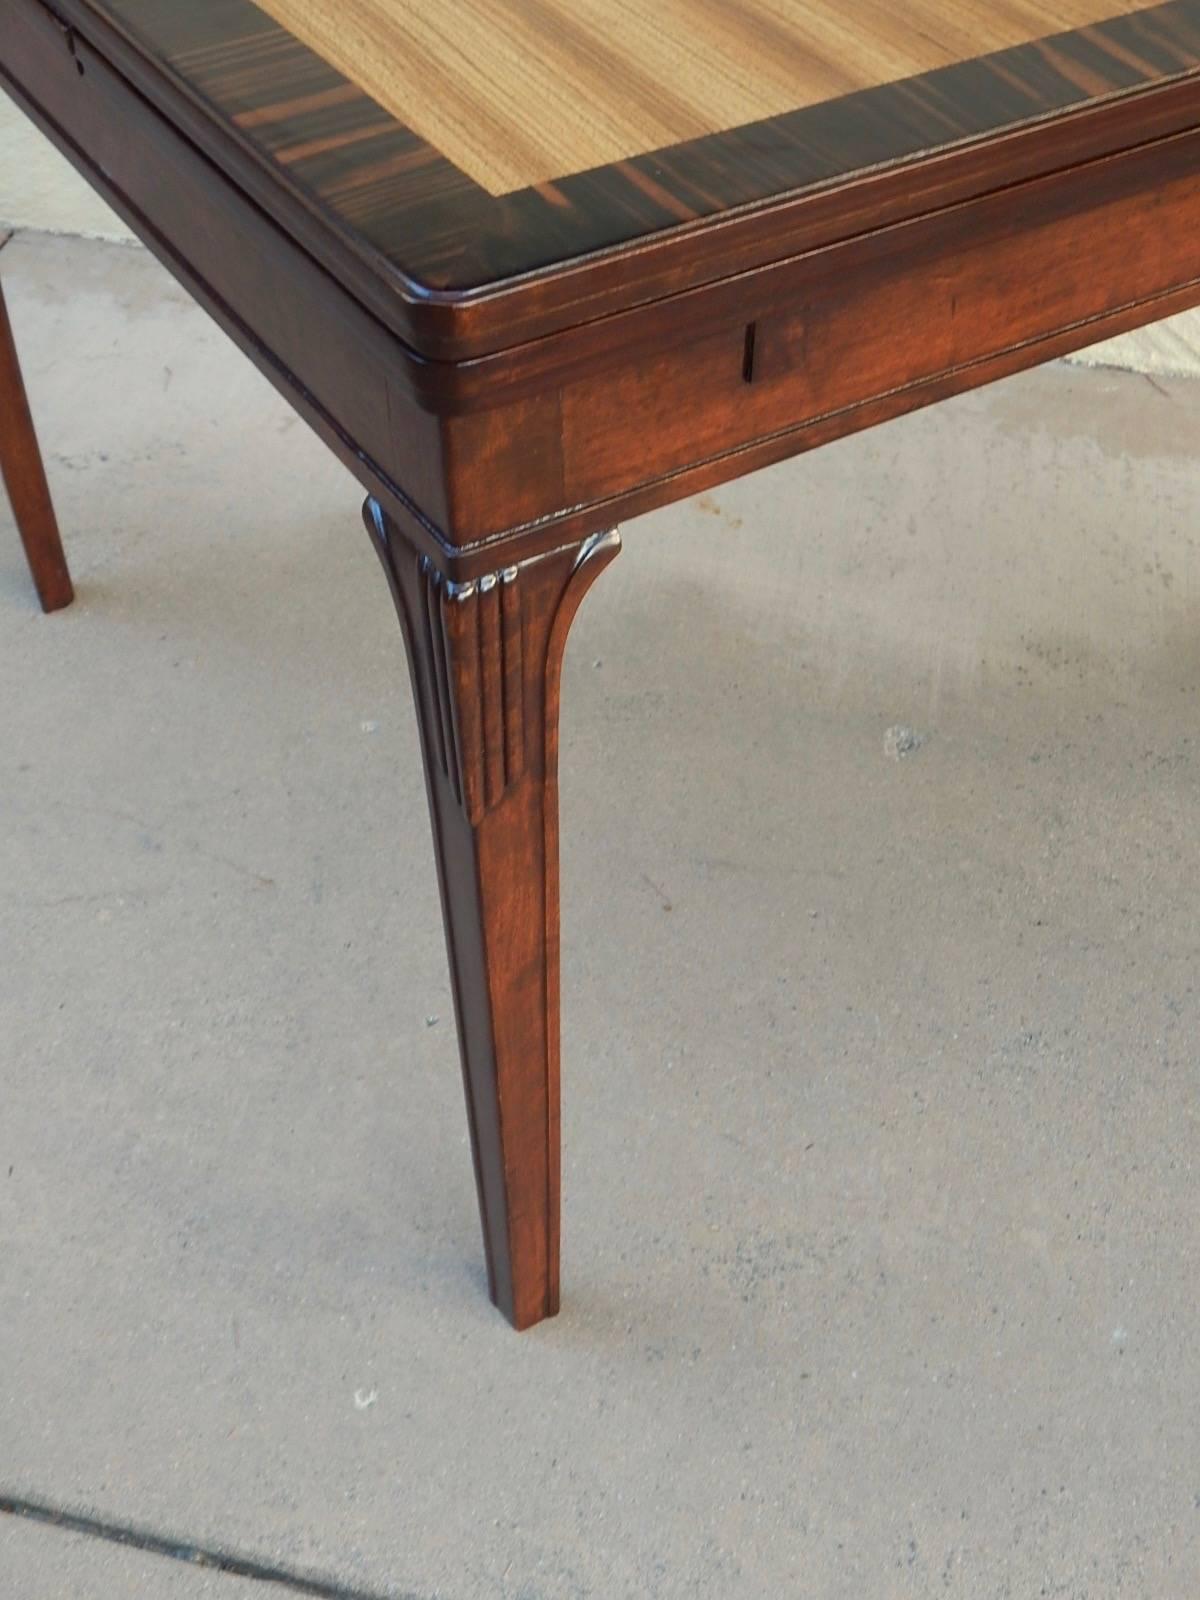 Swedish Art Deco extendible side table by Eric Chambert, circa 1930. Rendered in birch wood and zebrino with parquetry top in elm. There are two concealed leaves which extend the top to a total of 57 inches. This table has just been impeccably